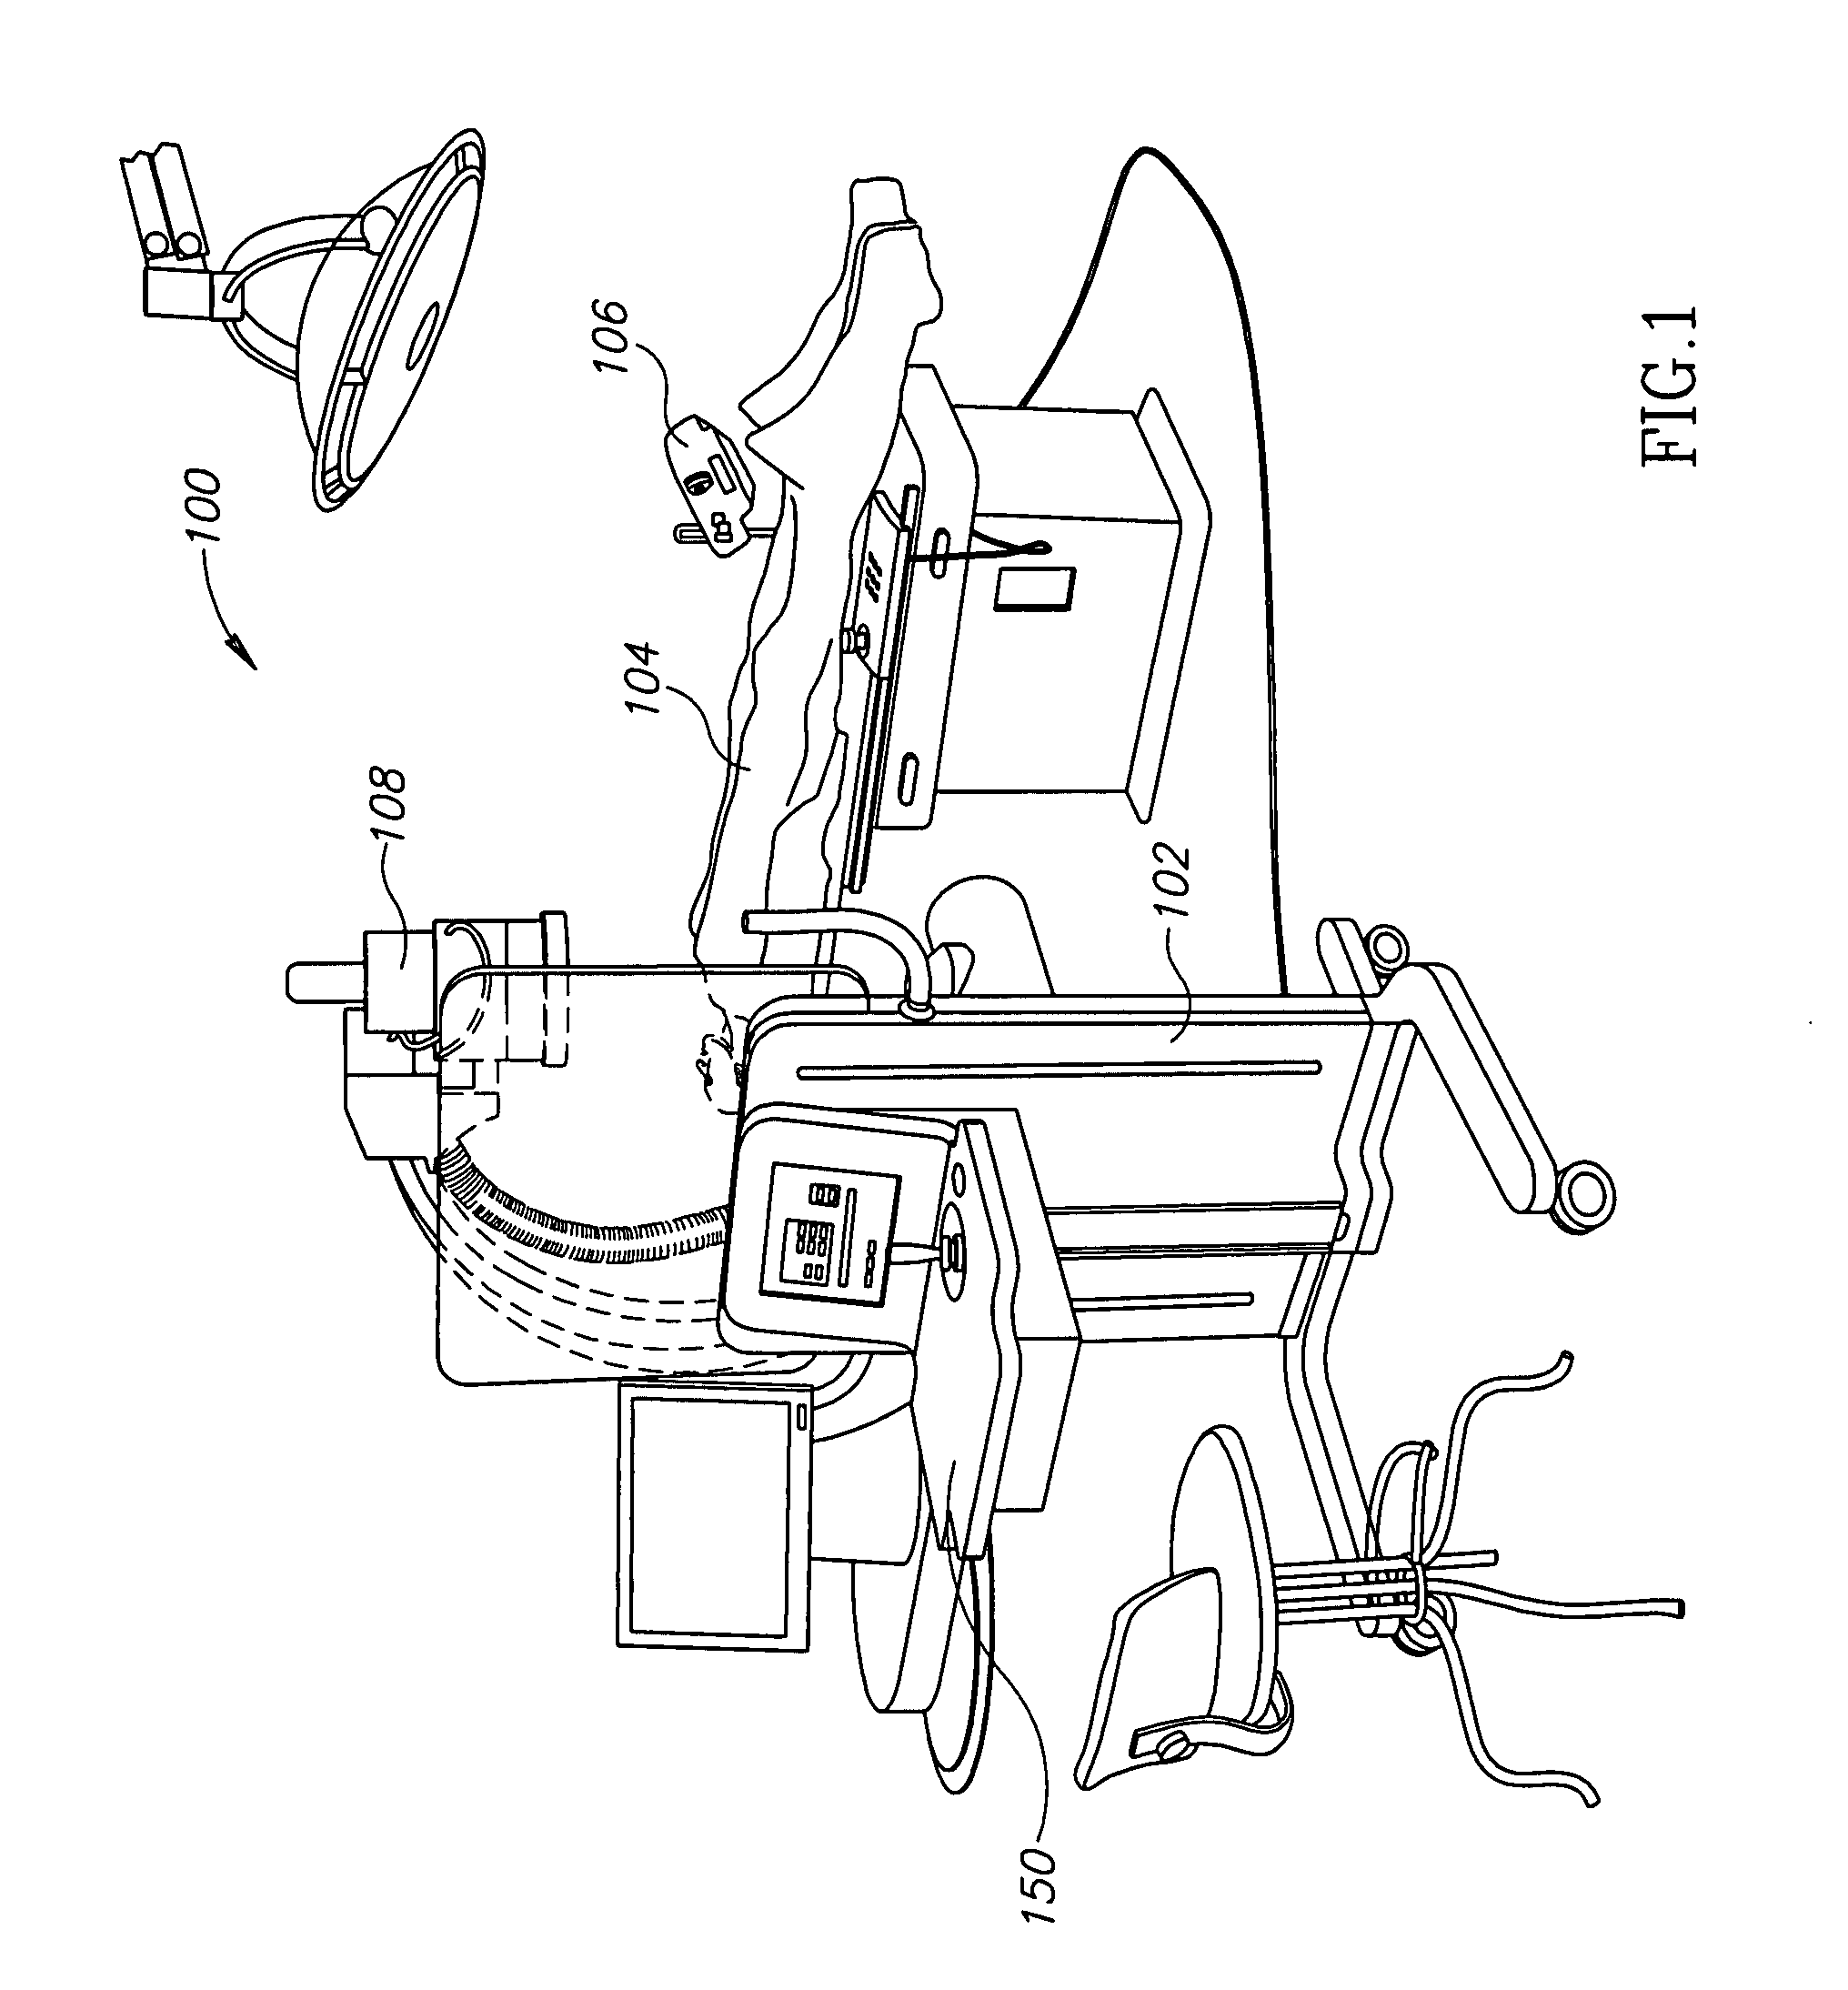 Protected control console apparatuses